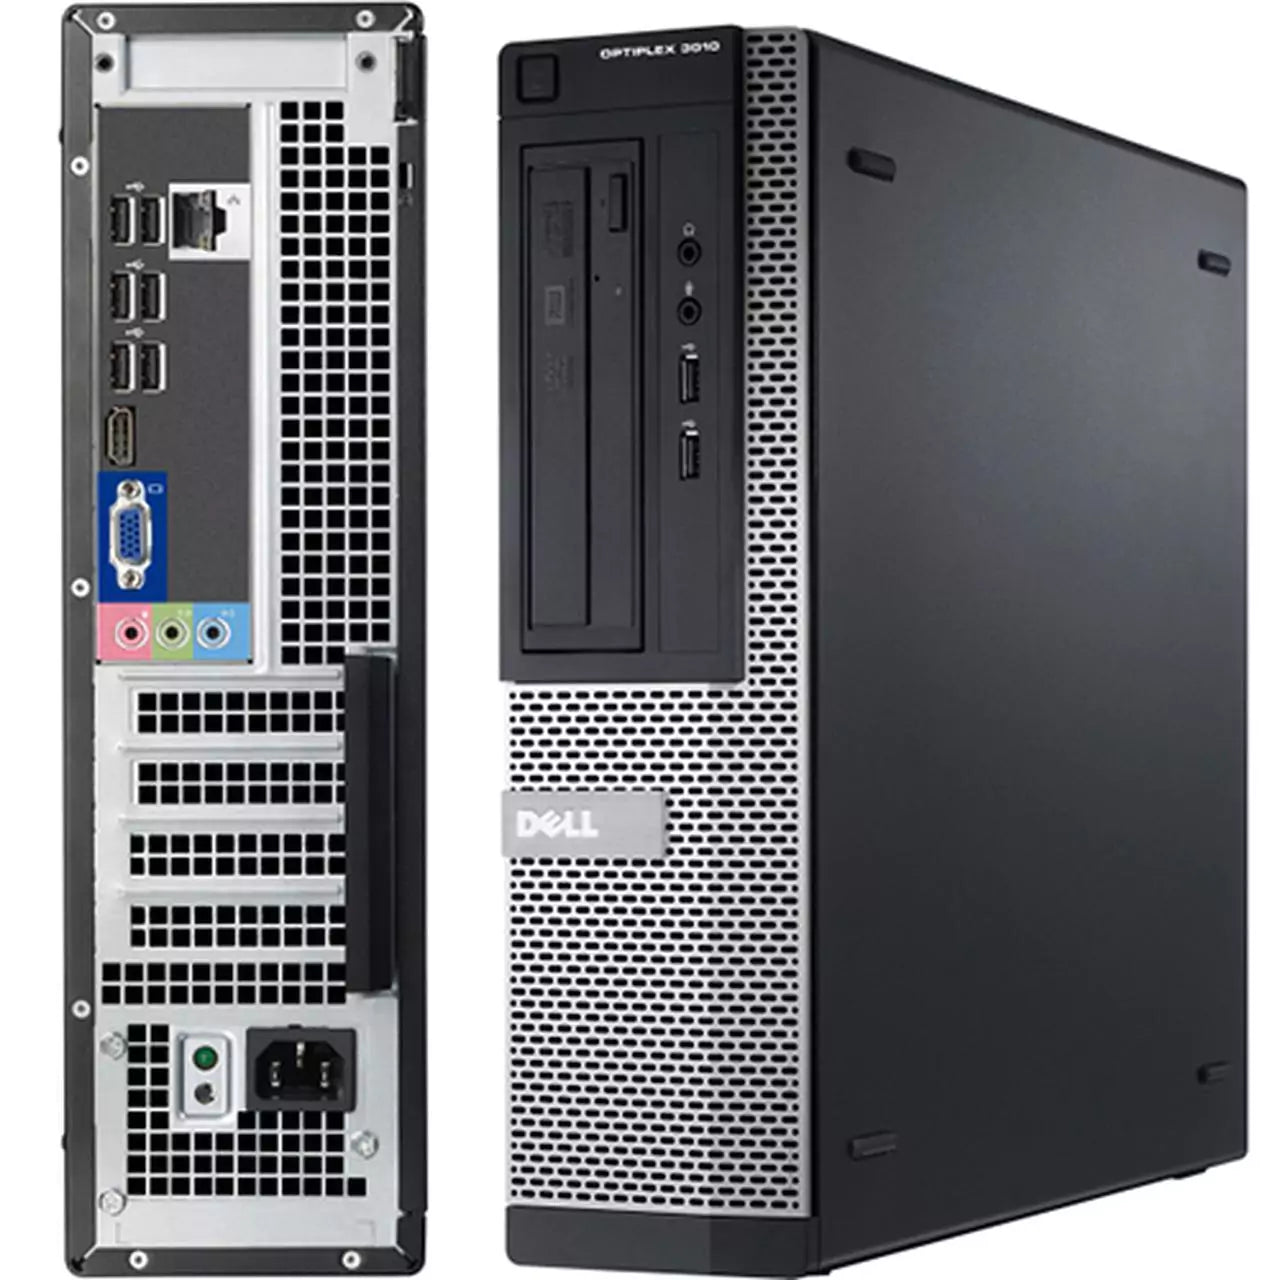 Dell Optiplex 3010 DT | Intel Core i3-3220 - 3.3Ghz | 8Gb Ram | 500Gb Hard Disk | Windows 10 | Performance and upgradeability